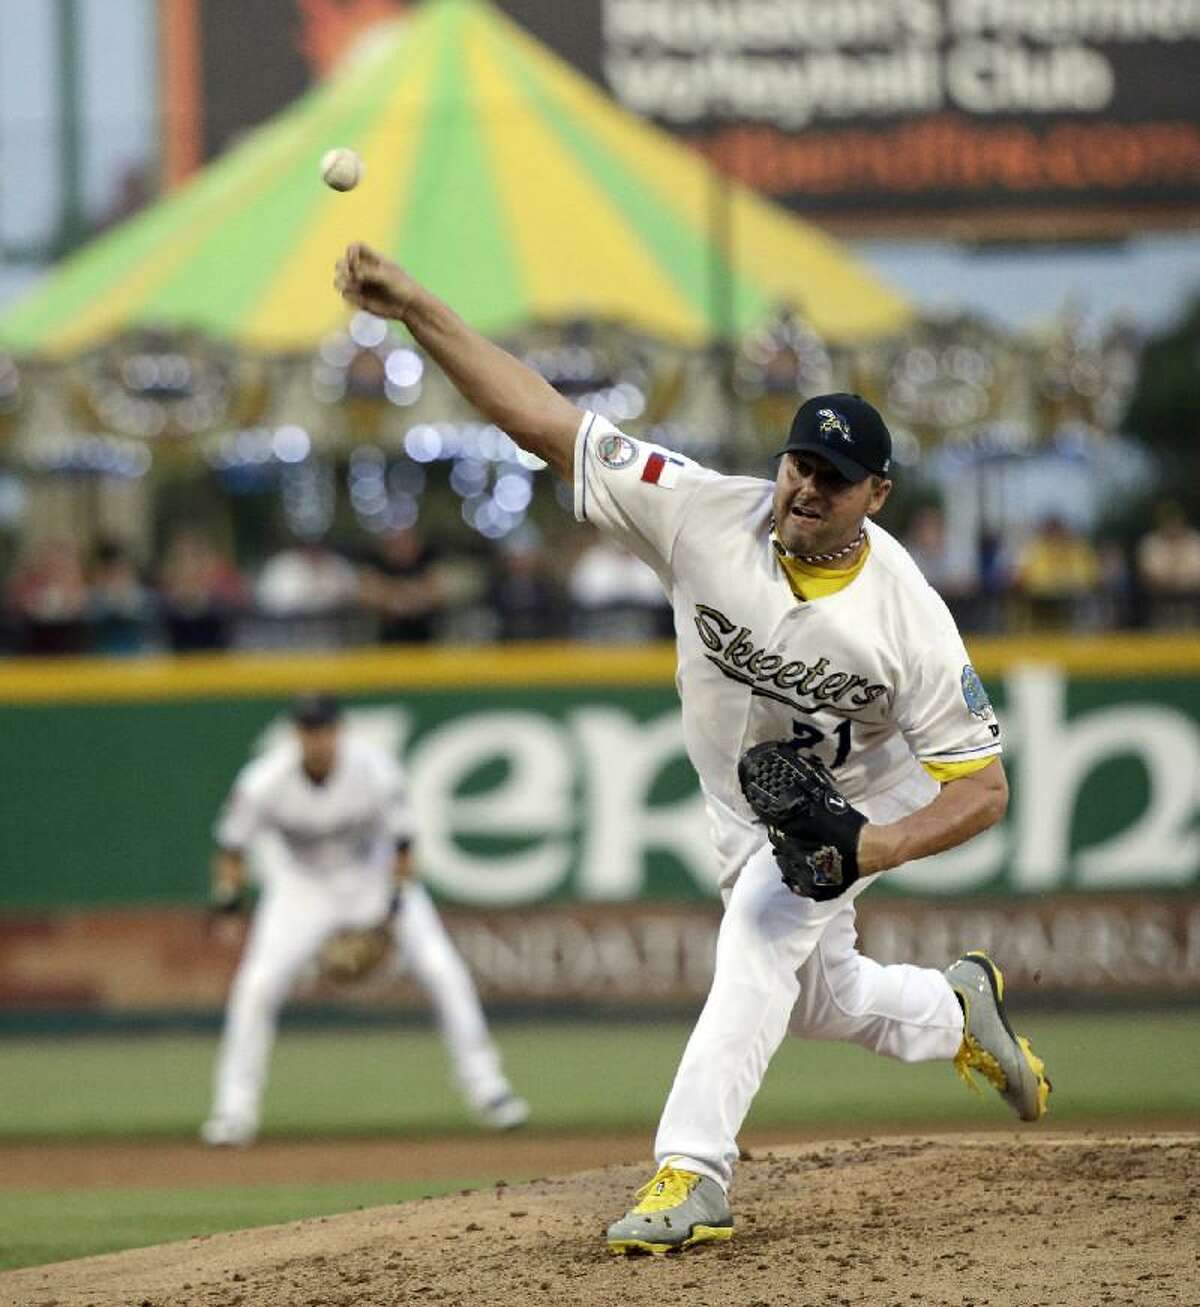 ASSOCIATED PRESS Sugar Land Skeeters pitcher Roger Clemens throws a pitch during a game against the Bridgeport Bluefish Saturday in Sugar Land, Texas. Clemens, a seven-time Cy Young Award winner, signed with the Skeeters of the independent Atlantic League this week.